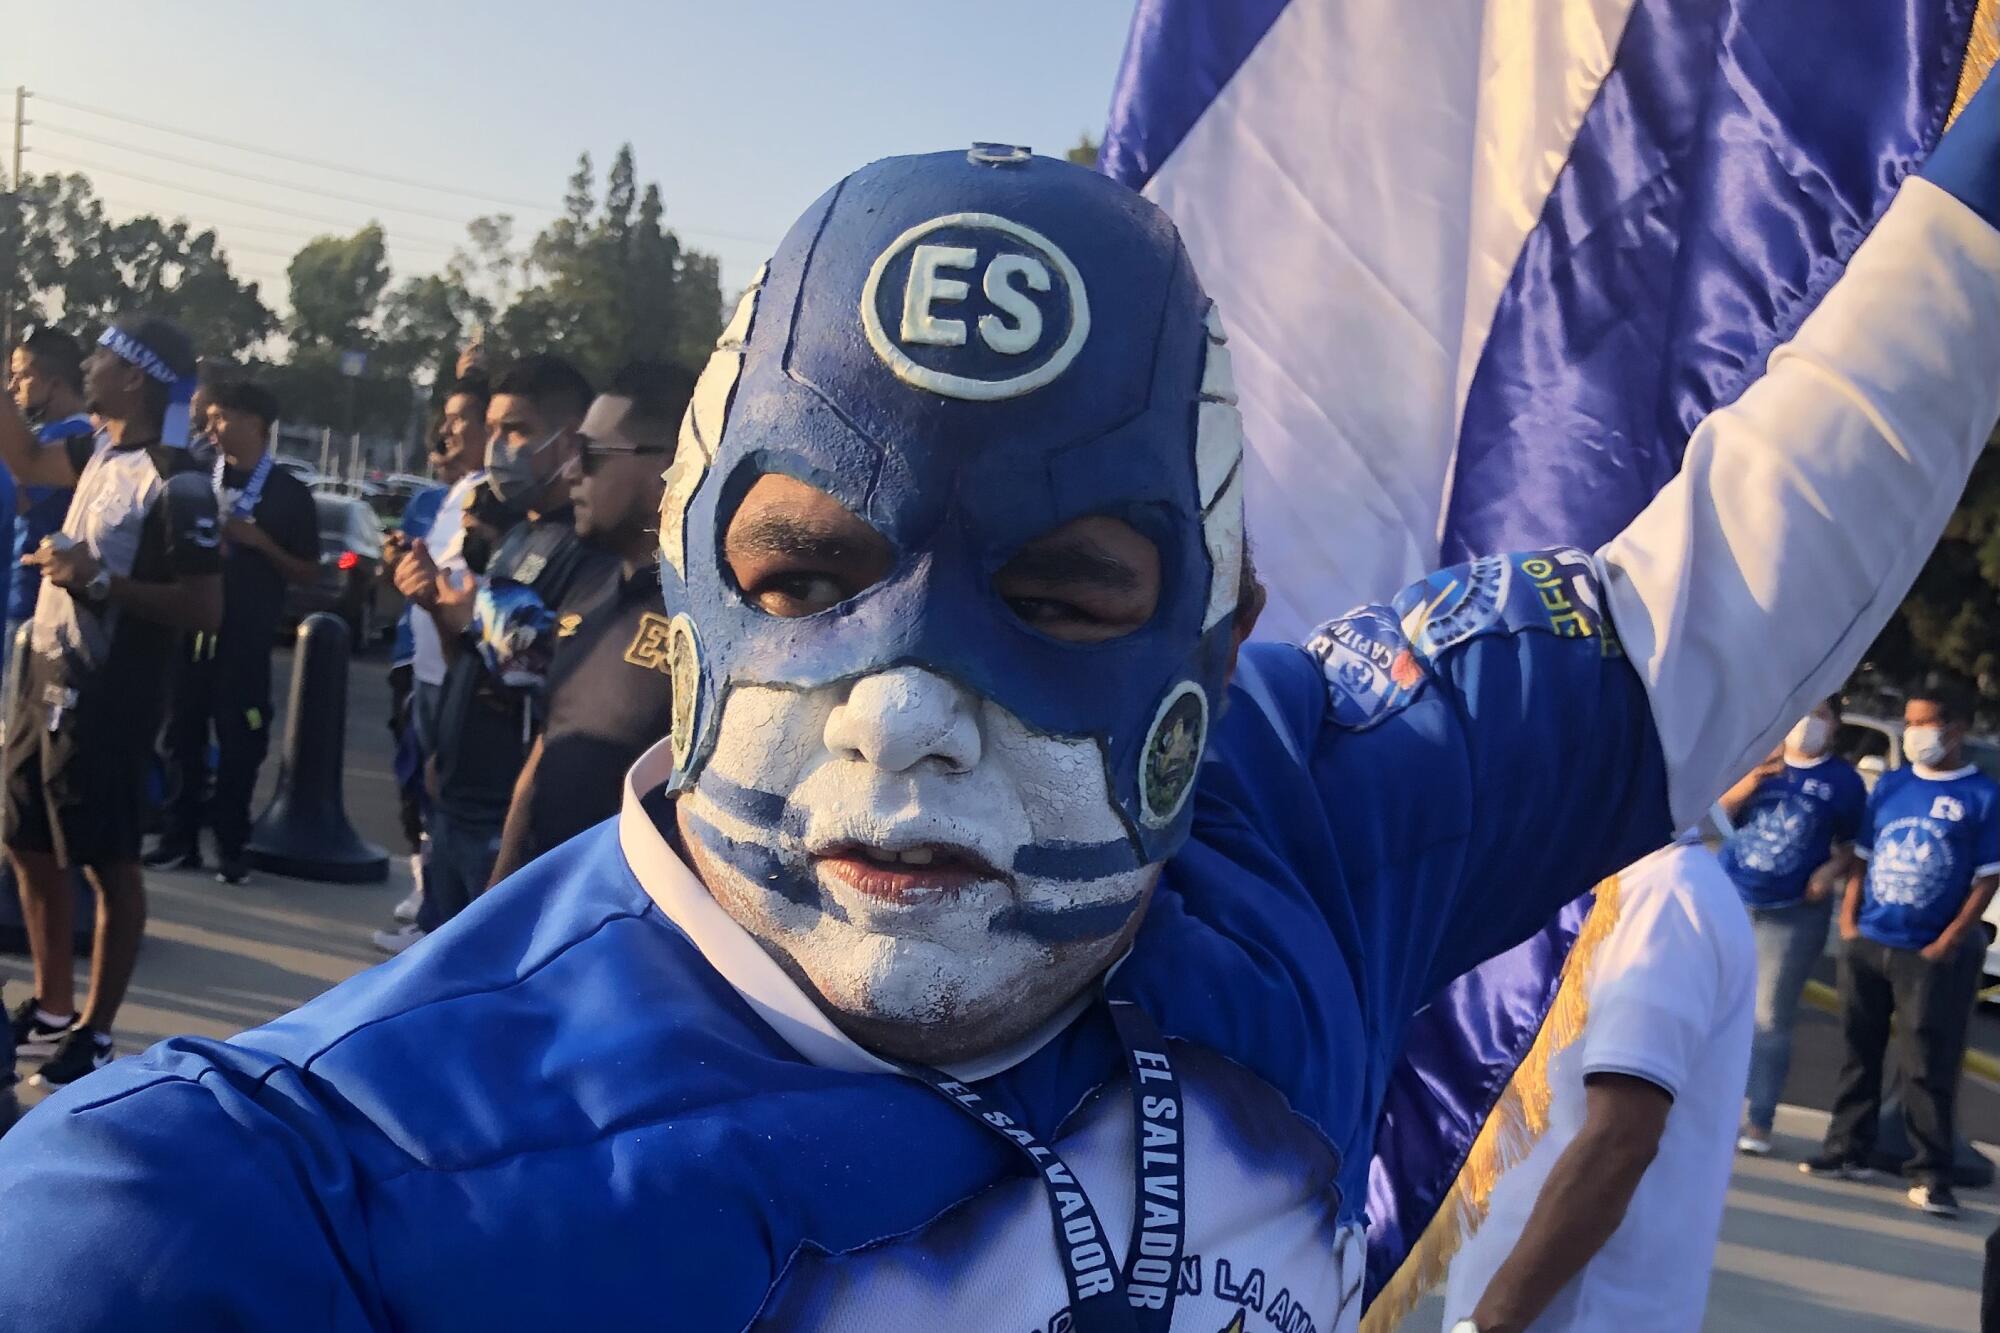 Mario Valladares, of Los Angeles, dresses up as Capitan Cuscatleco and waves the Salvadoran flag 